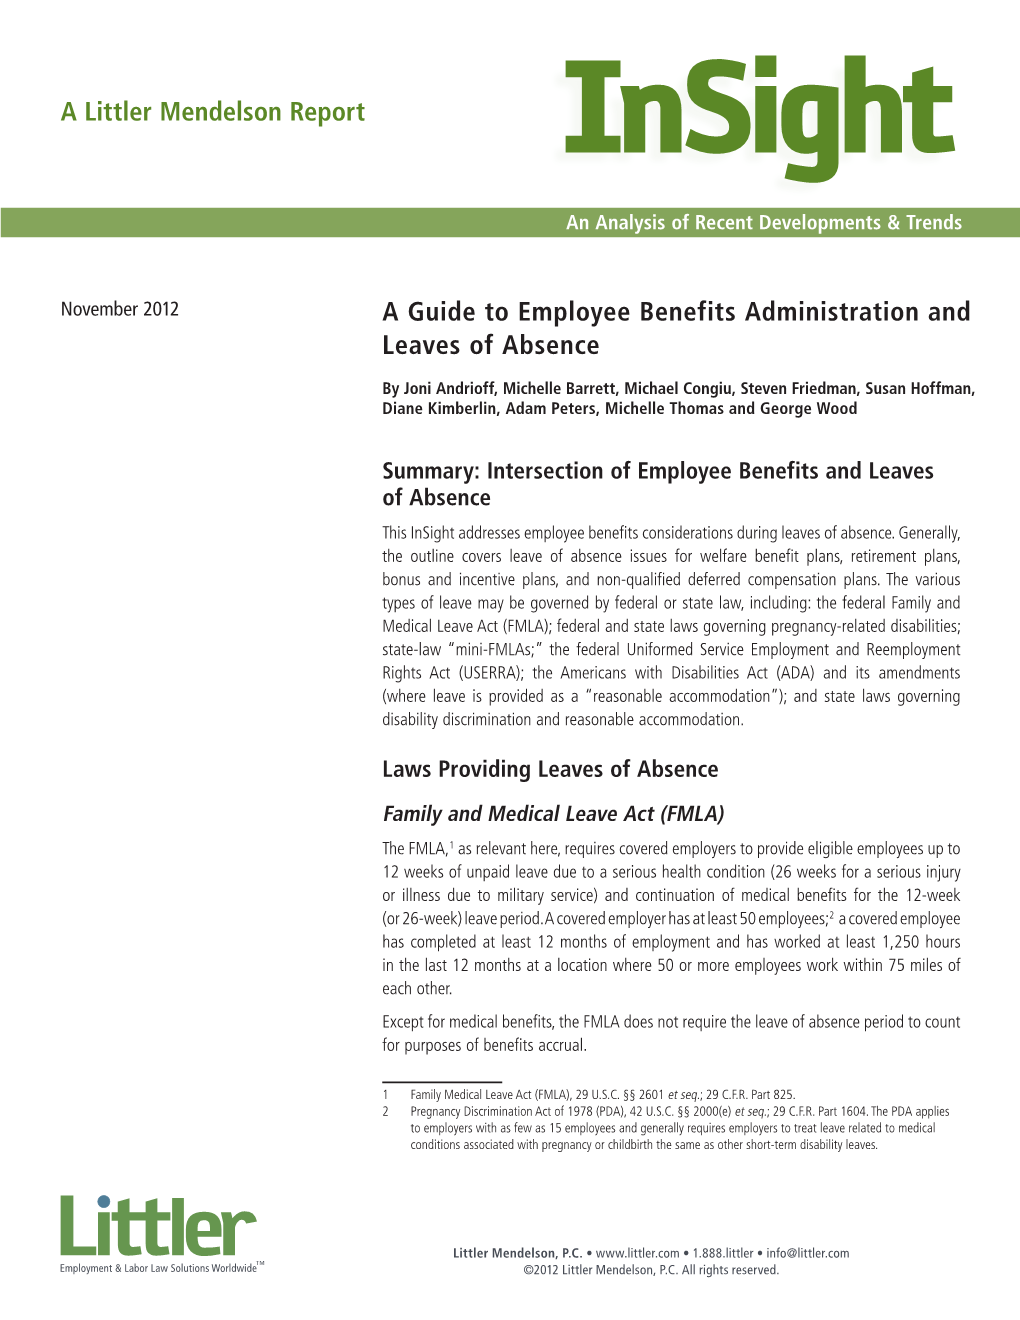 A Guide to Employee Benefits Administration and Leaves of Absence